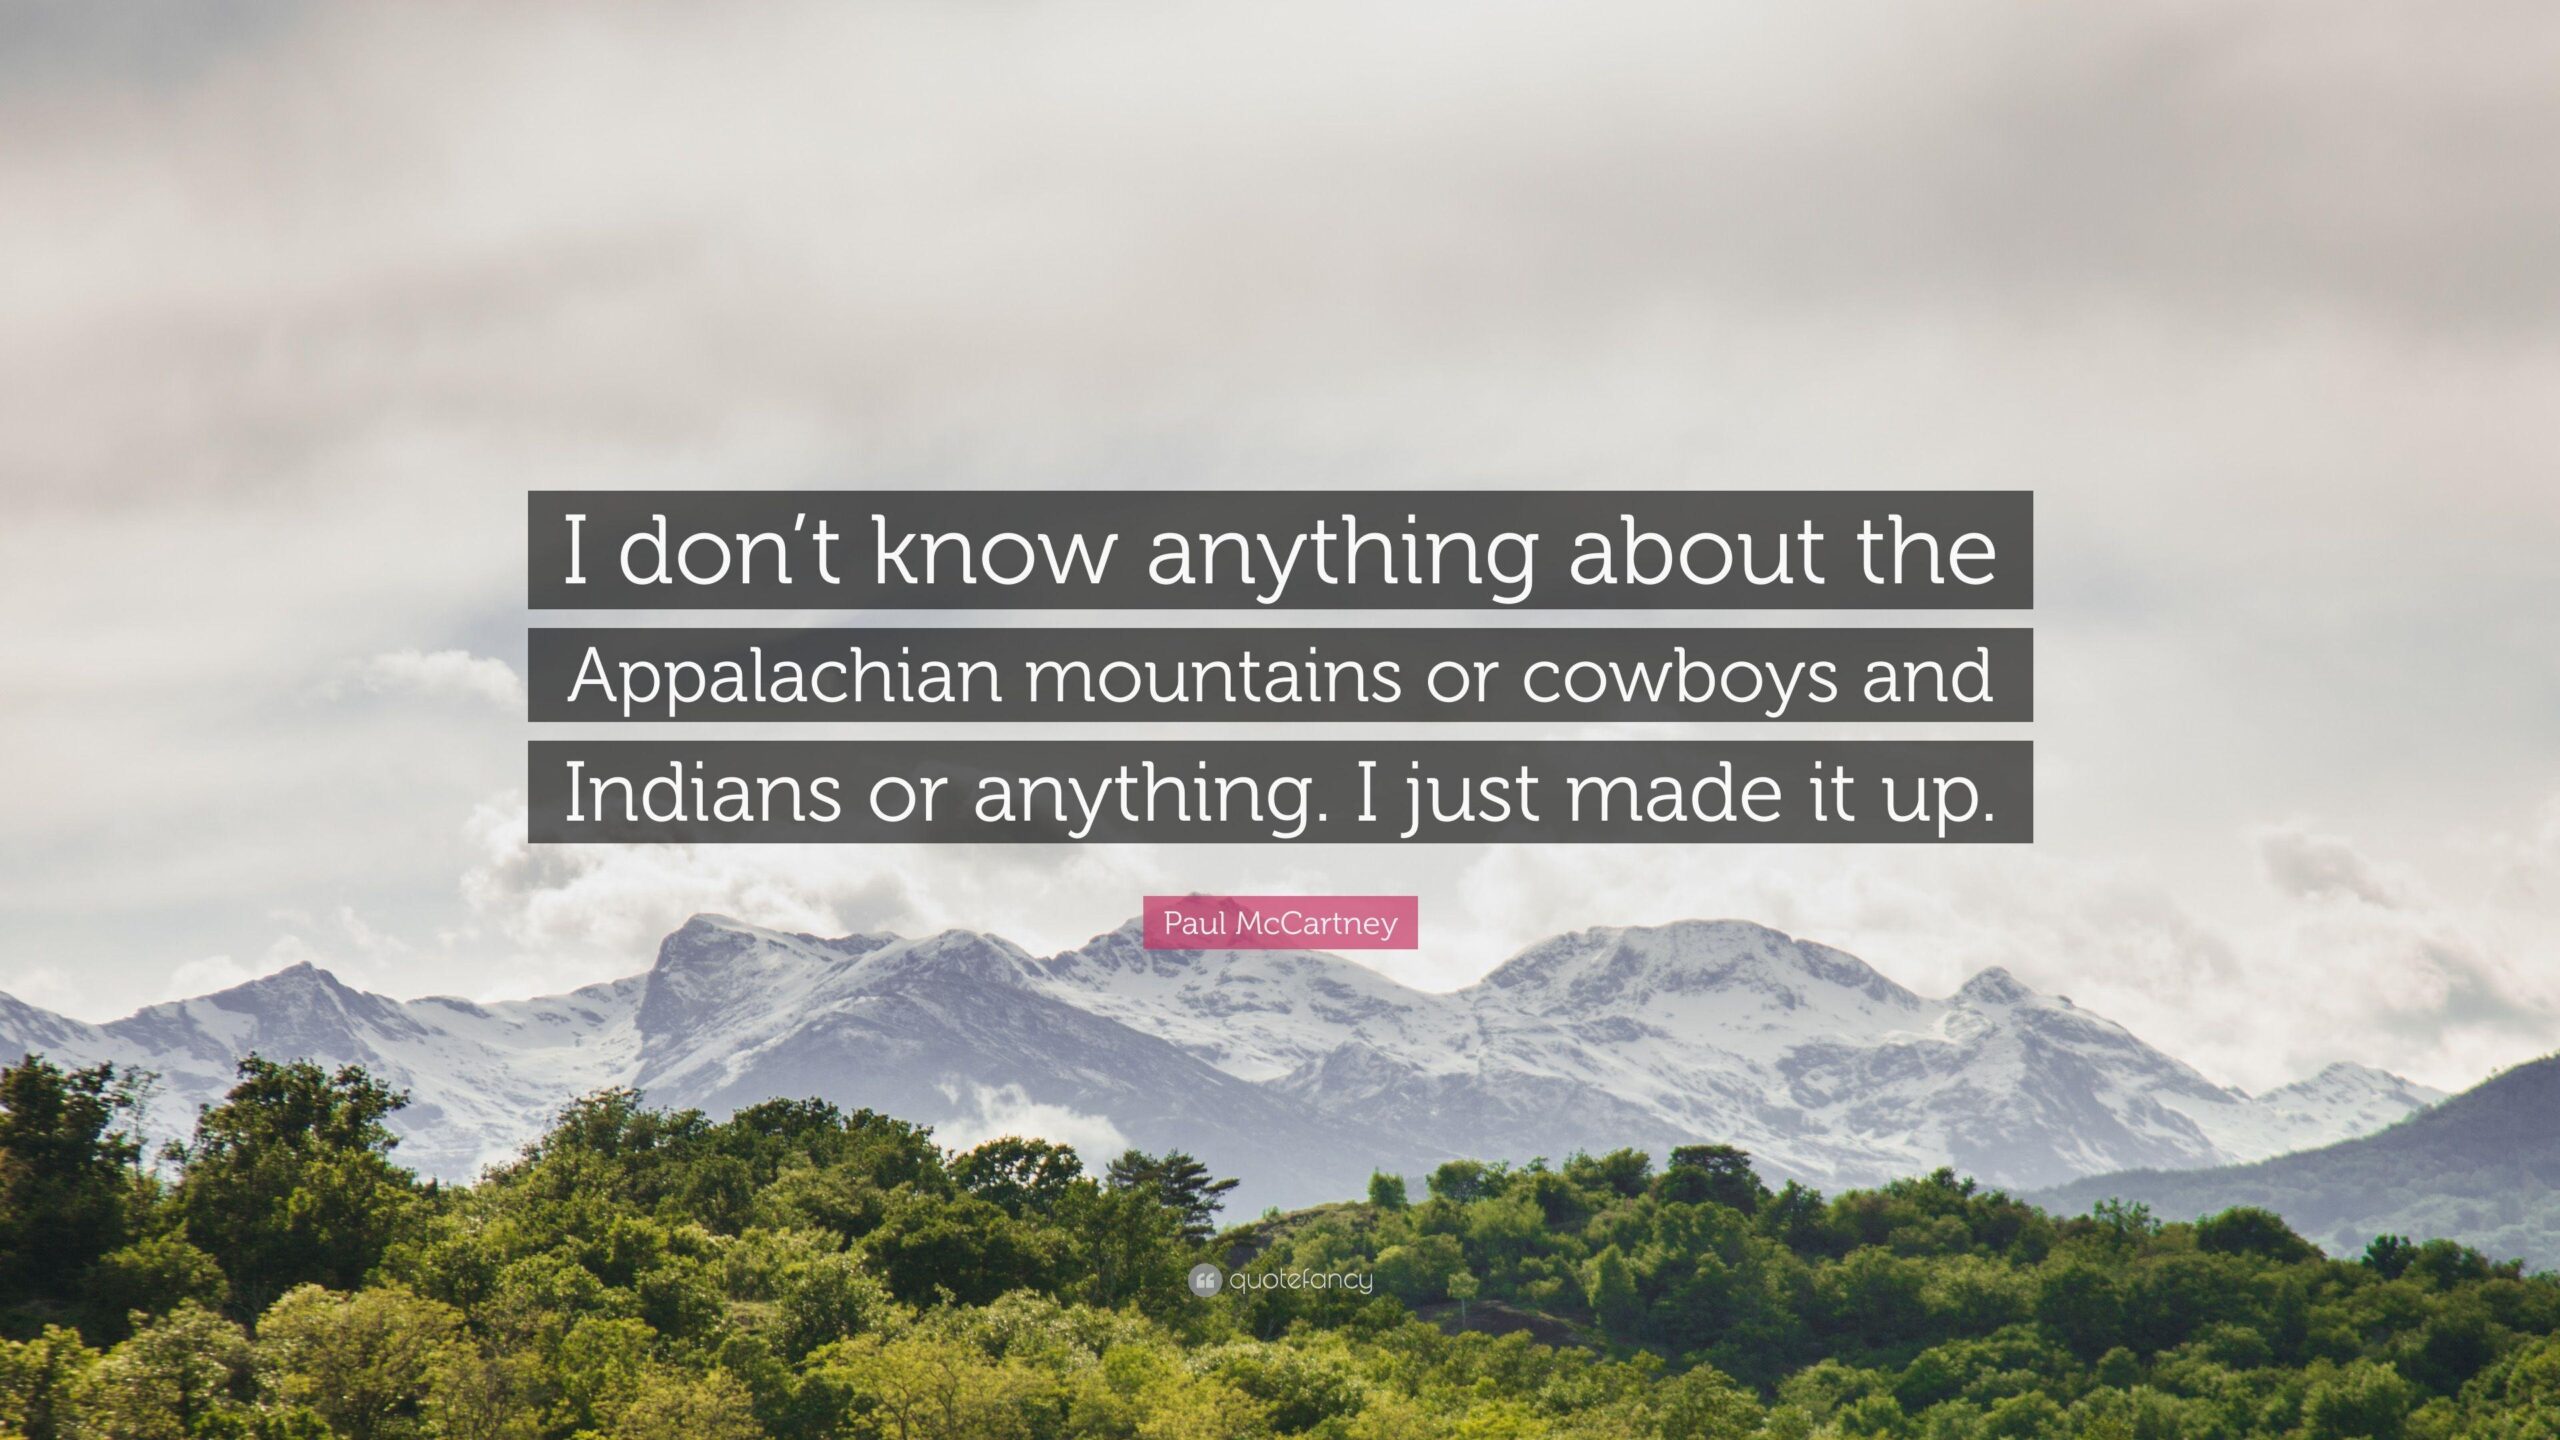 Paul McCartney Quote “I don’t know anything about the Appalachian